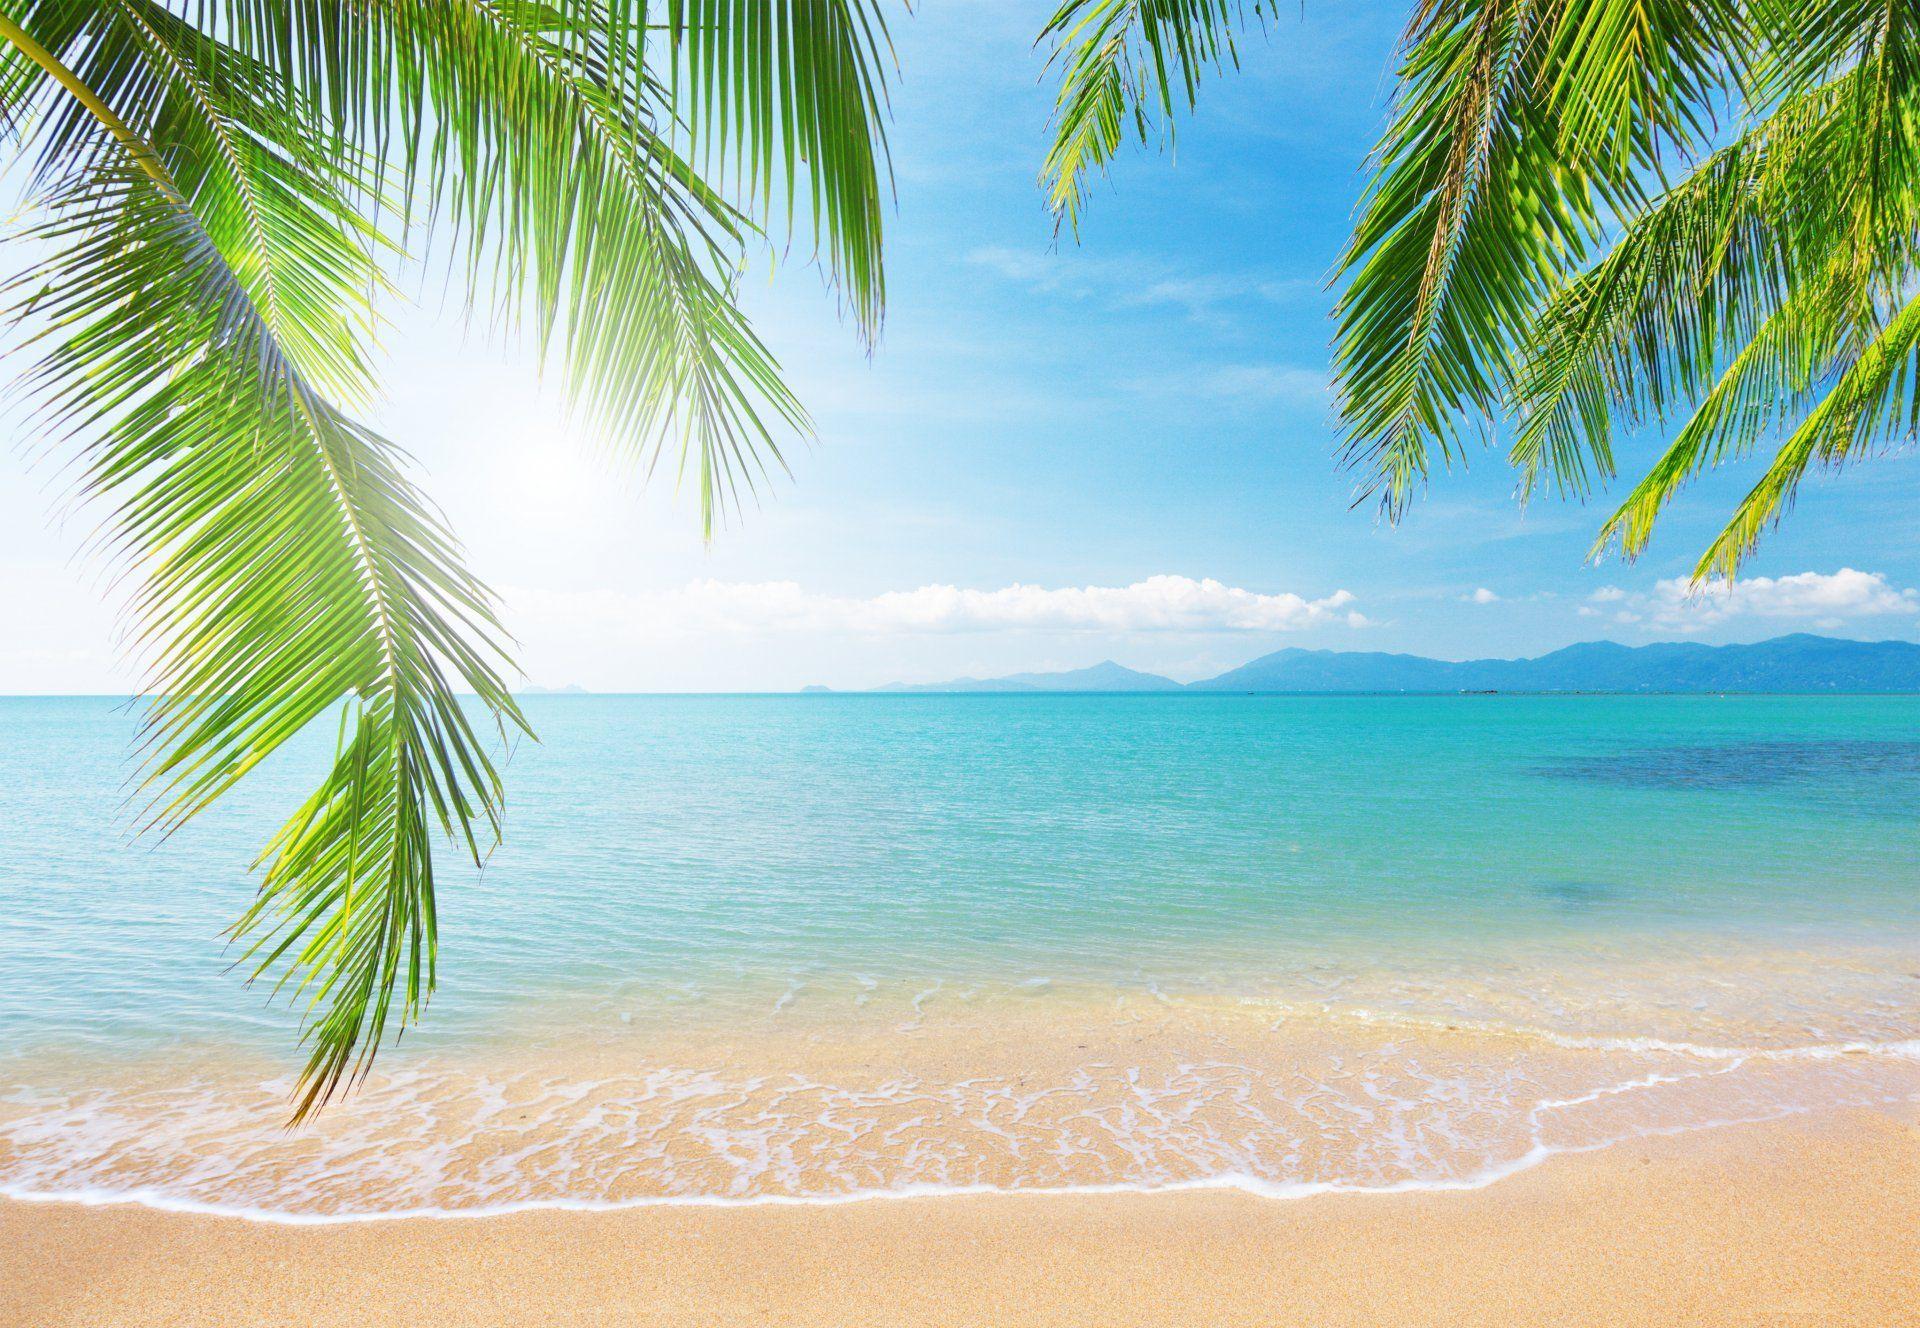 Tropical Beach Landscape Wallpapers - Top Free Tropical Beach Landscape